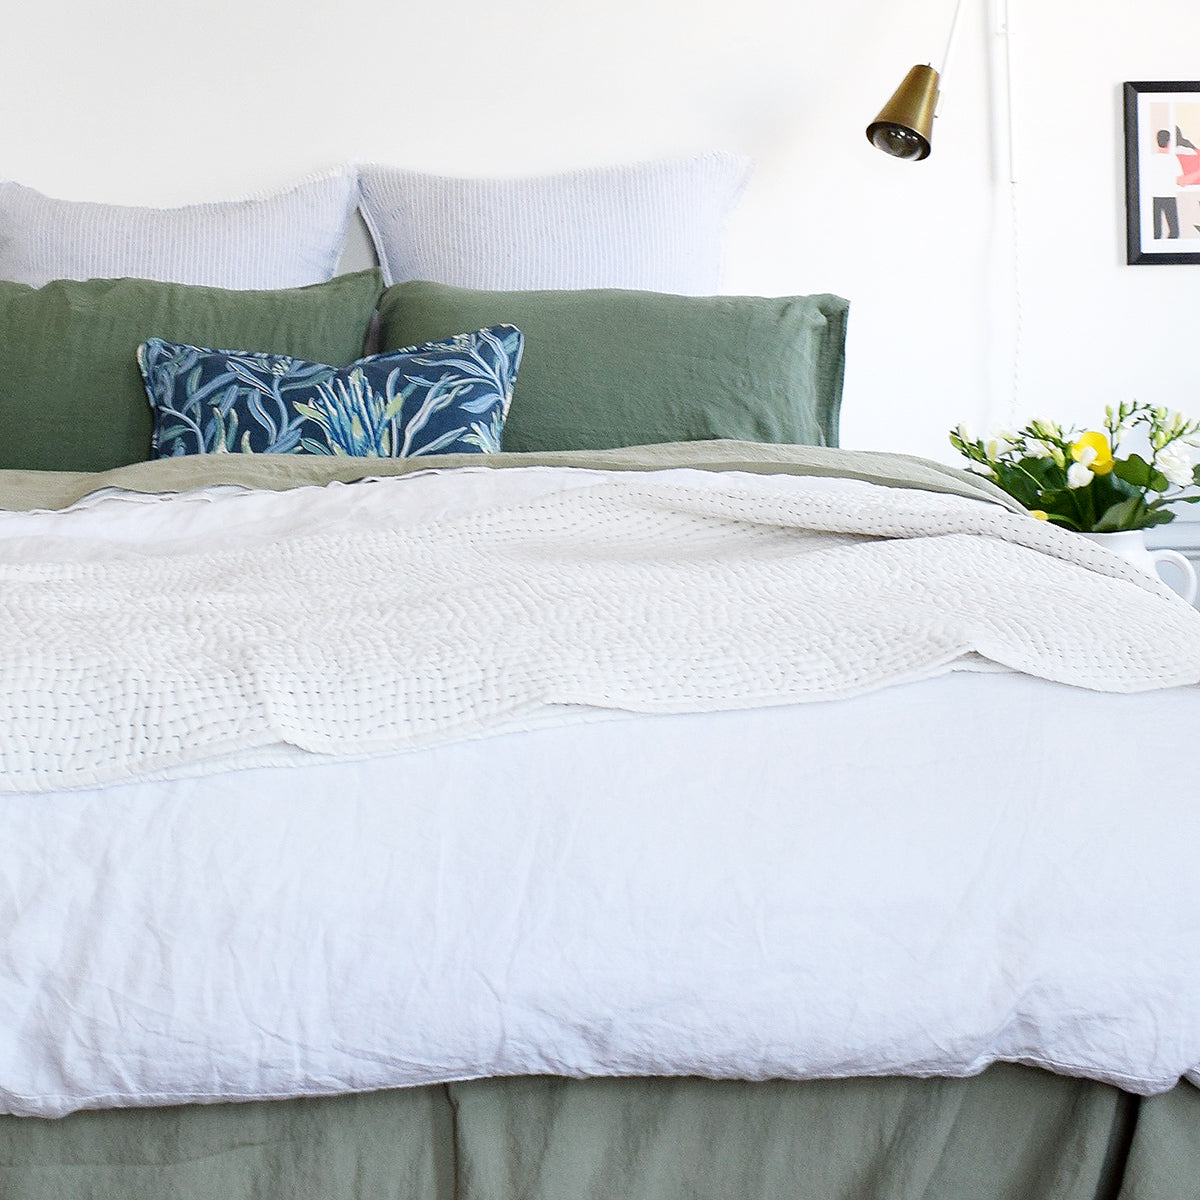 Linge Particulier Jade Green Standard Linen Pillowcase Sham with a white linen duvet and blue Utopia Goods pillow for a colorful linen bedding look in camo green - Collyer&#39;s Mansion